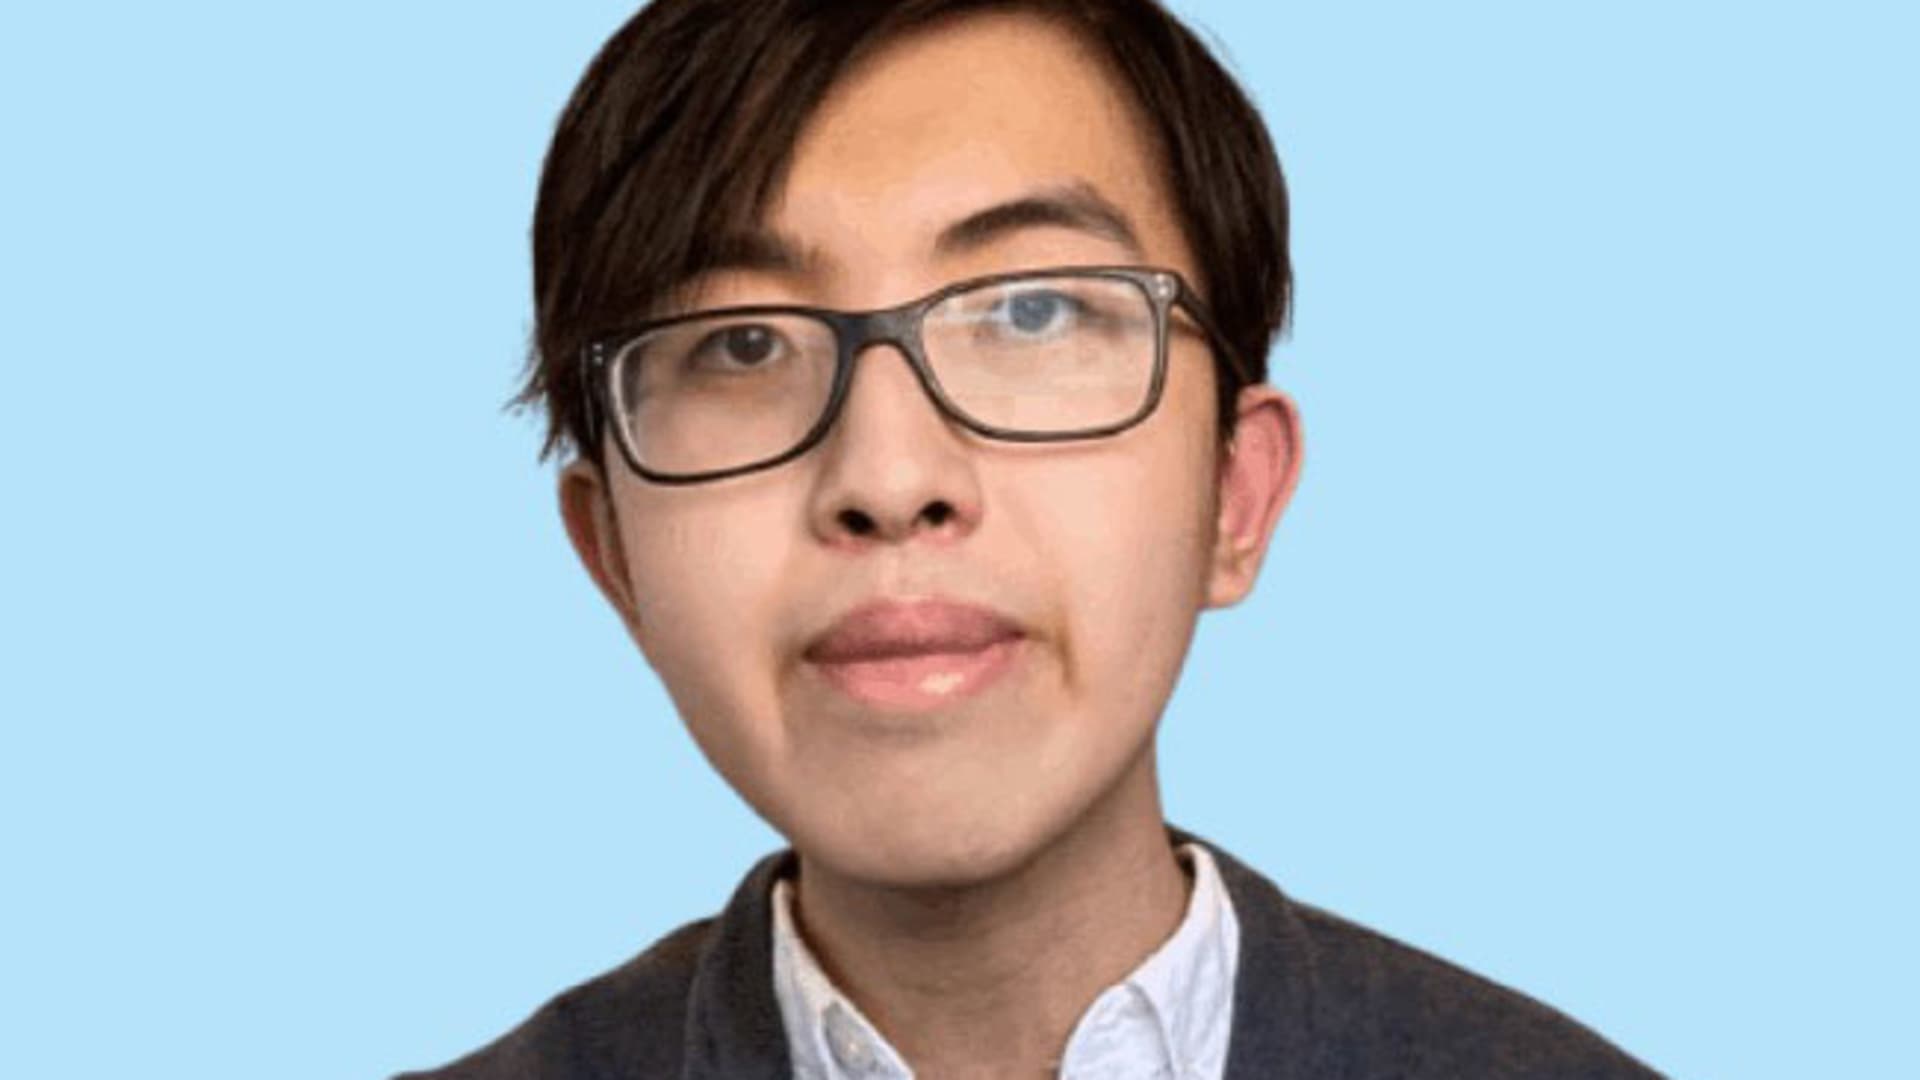 Mike Deng, a student at ArtCenter College of Design and a product design intern at JusticeText